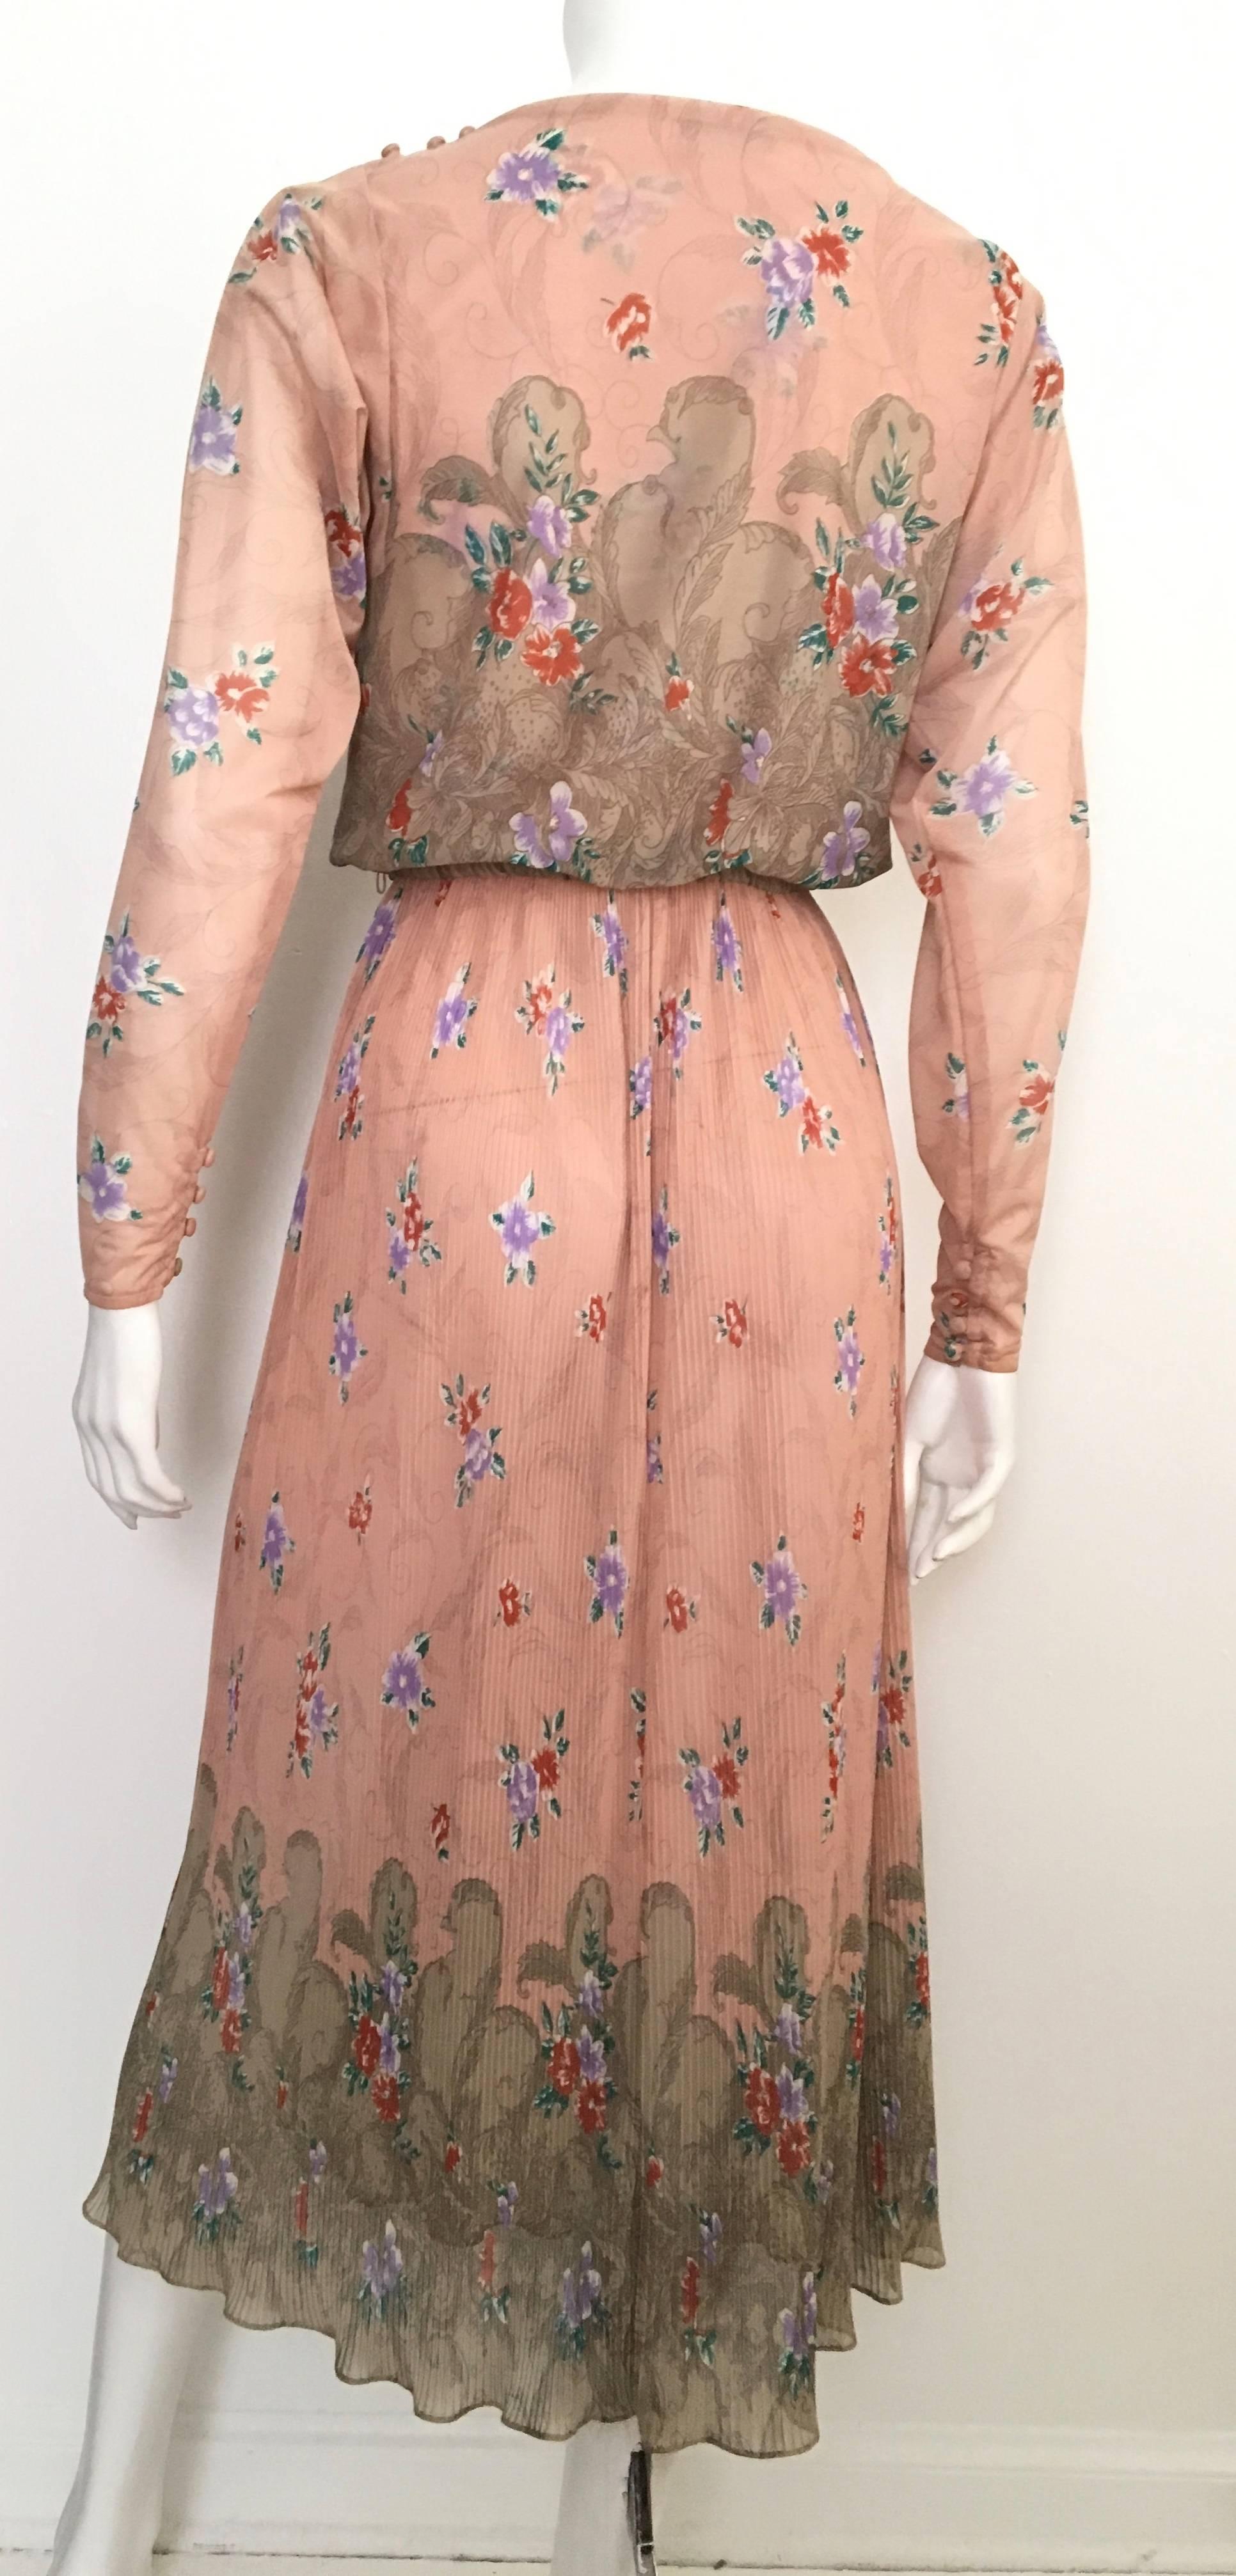 Neiman Marcus Floral Asian Dress Size 4  In Excellent Condition For Sale In Atlanta, GA